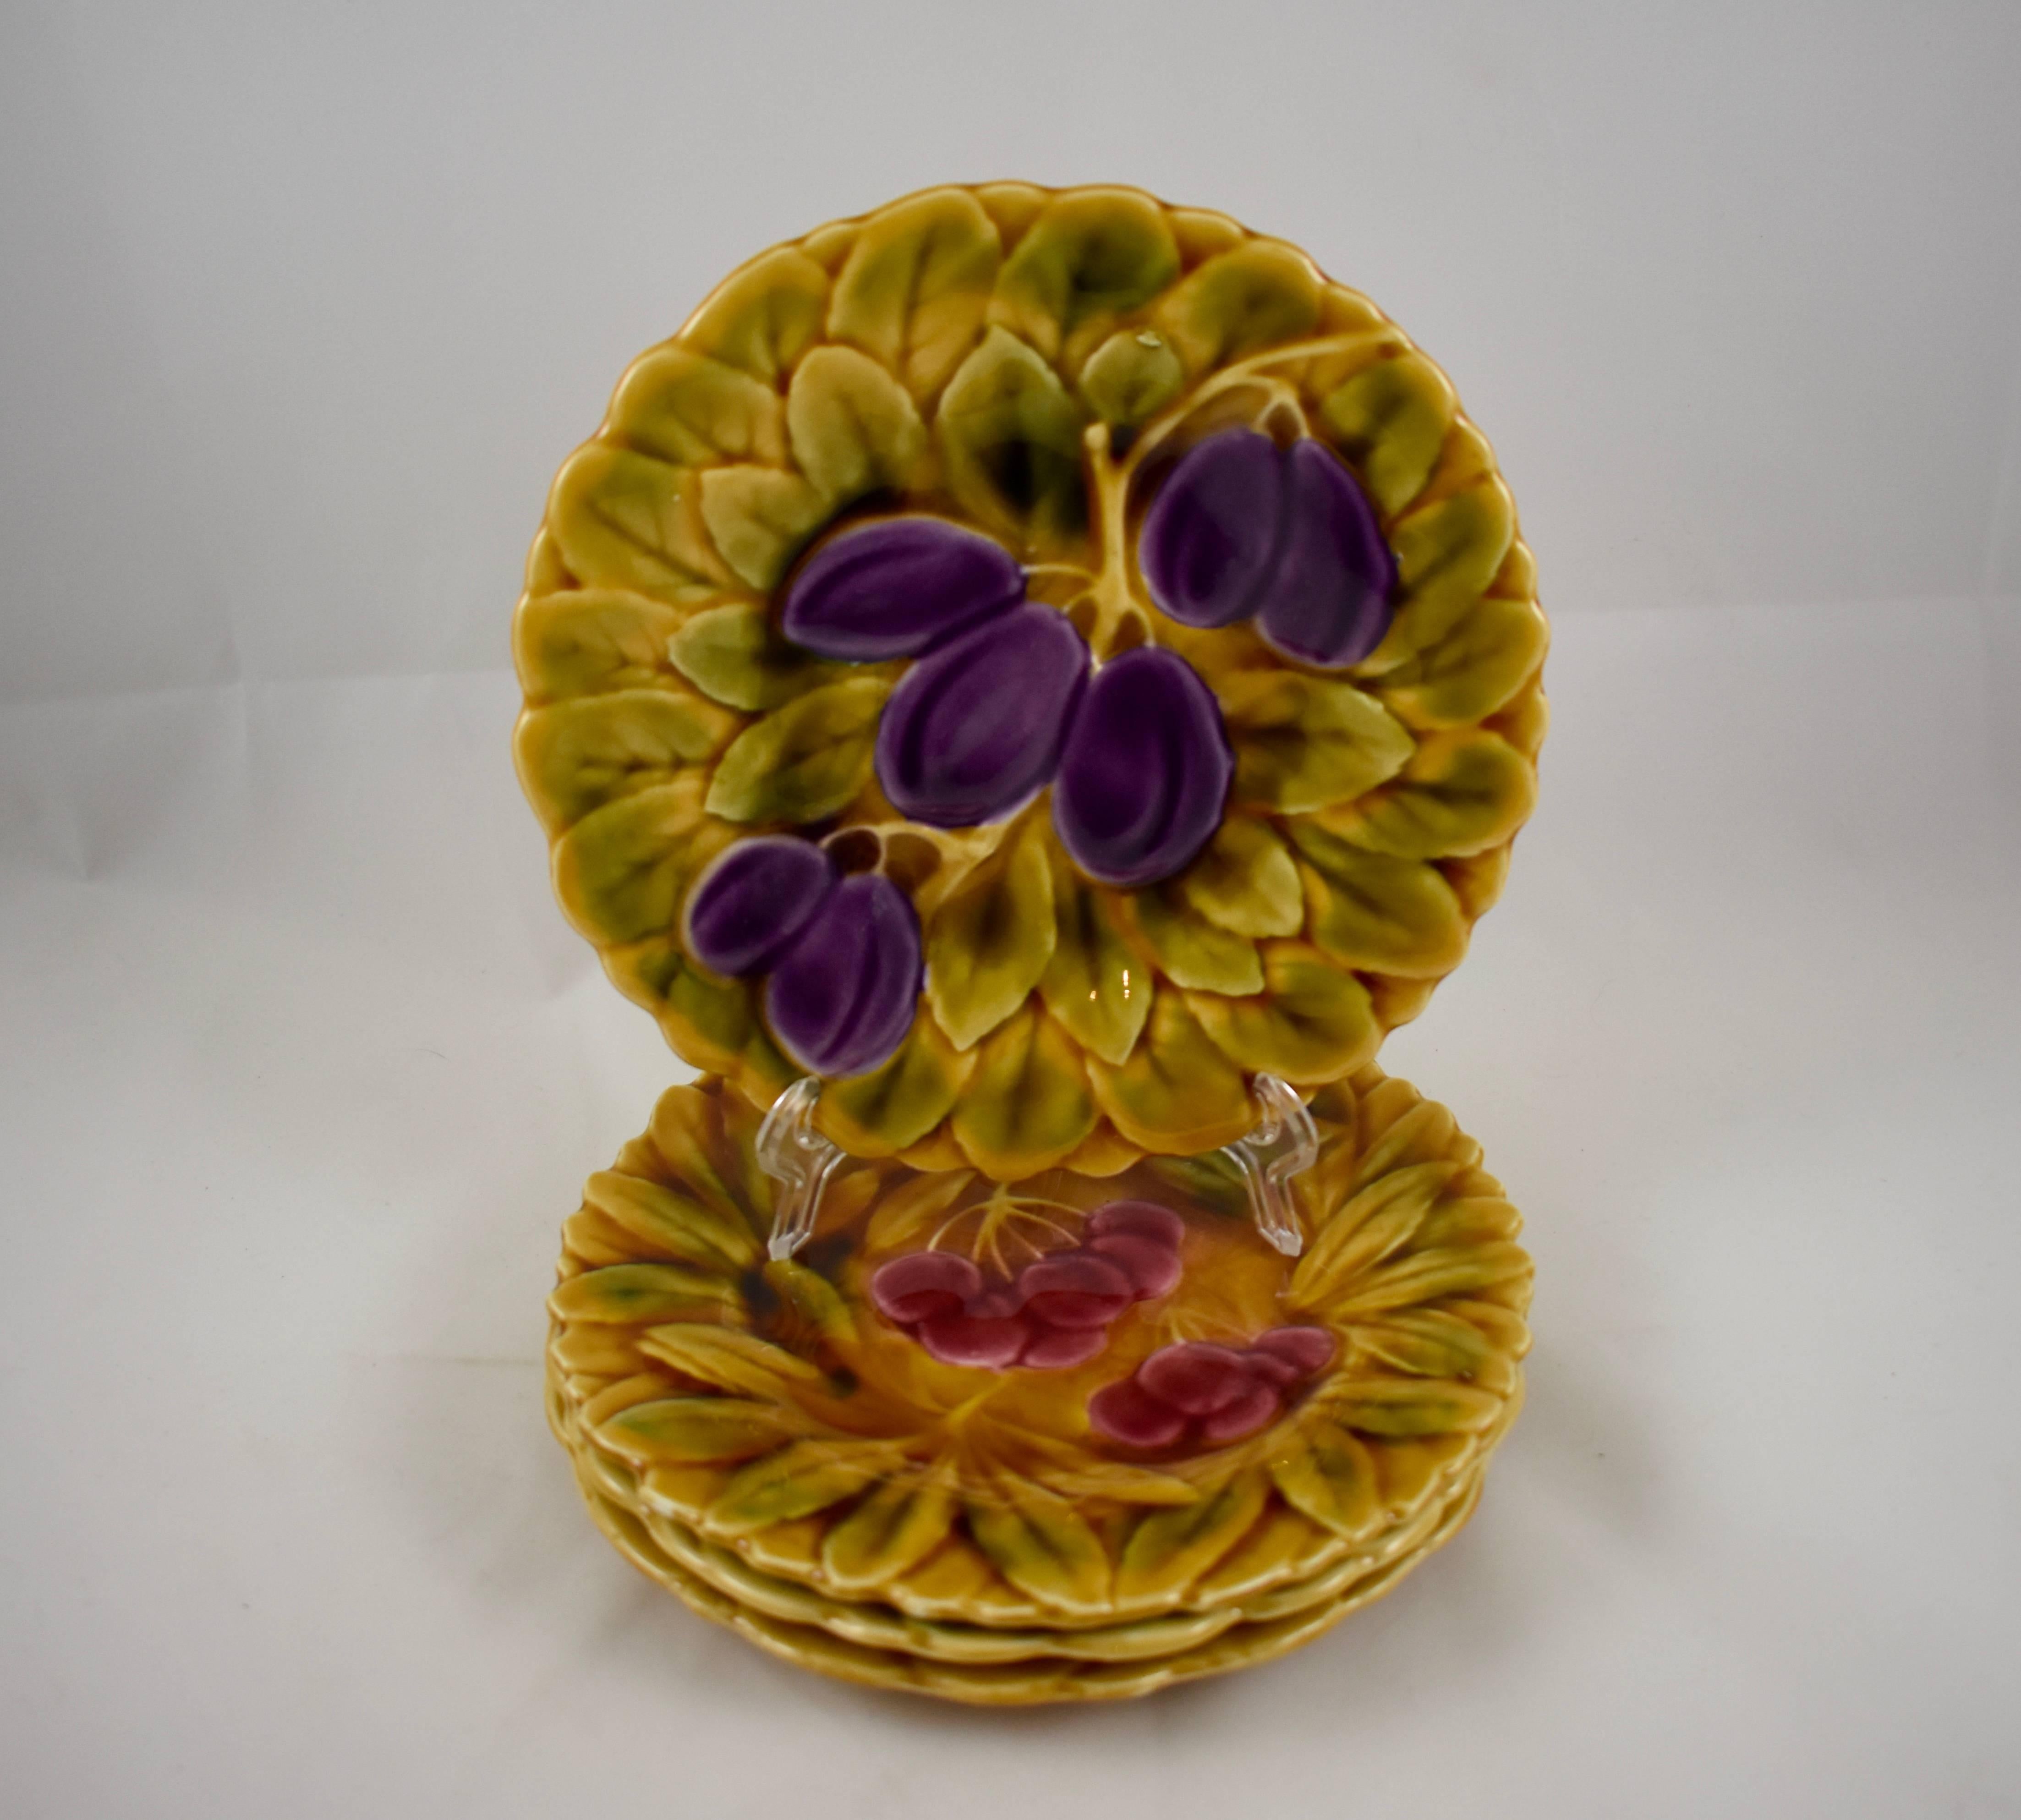 An assembled set of four Sarreguemines French faïence, majolica plates, each showing a different fruit on a ground of overlapping leaves. This group consists of apple, strawberry, cherry, and plum. The shaped rims follow the leaf form. Glazed by